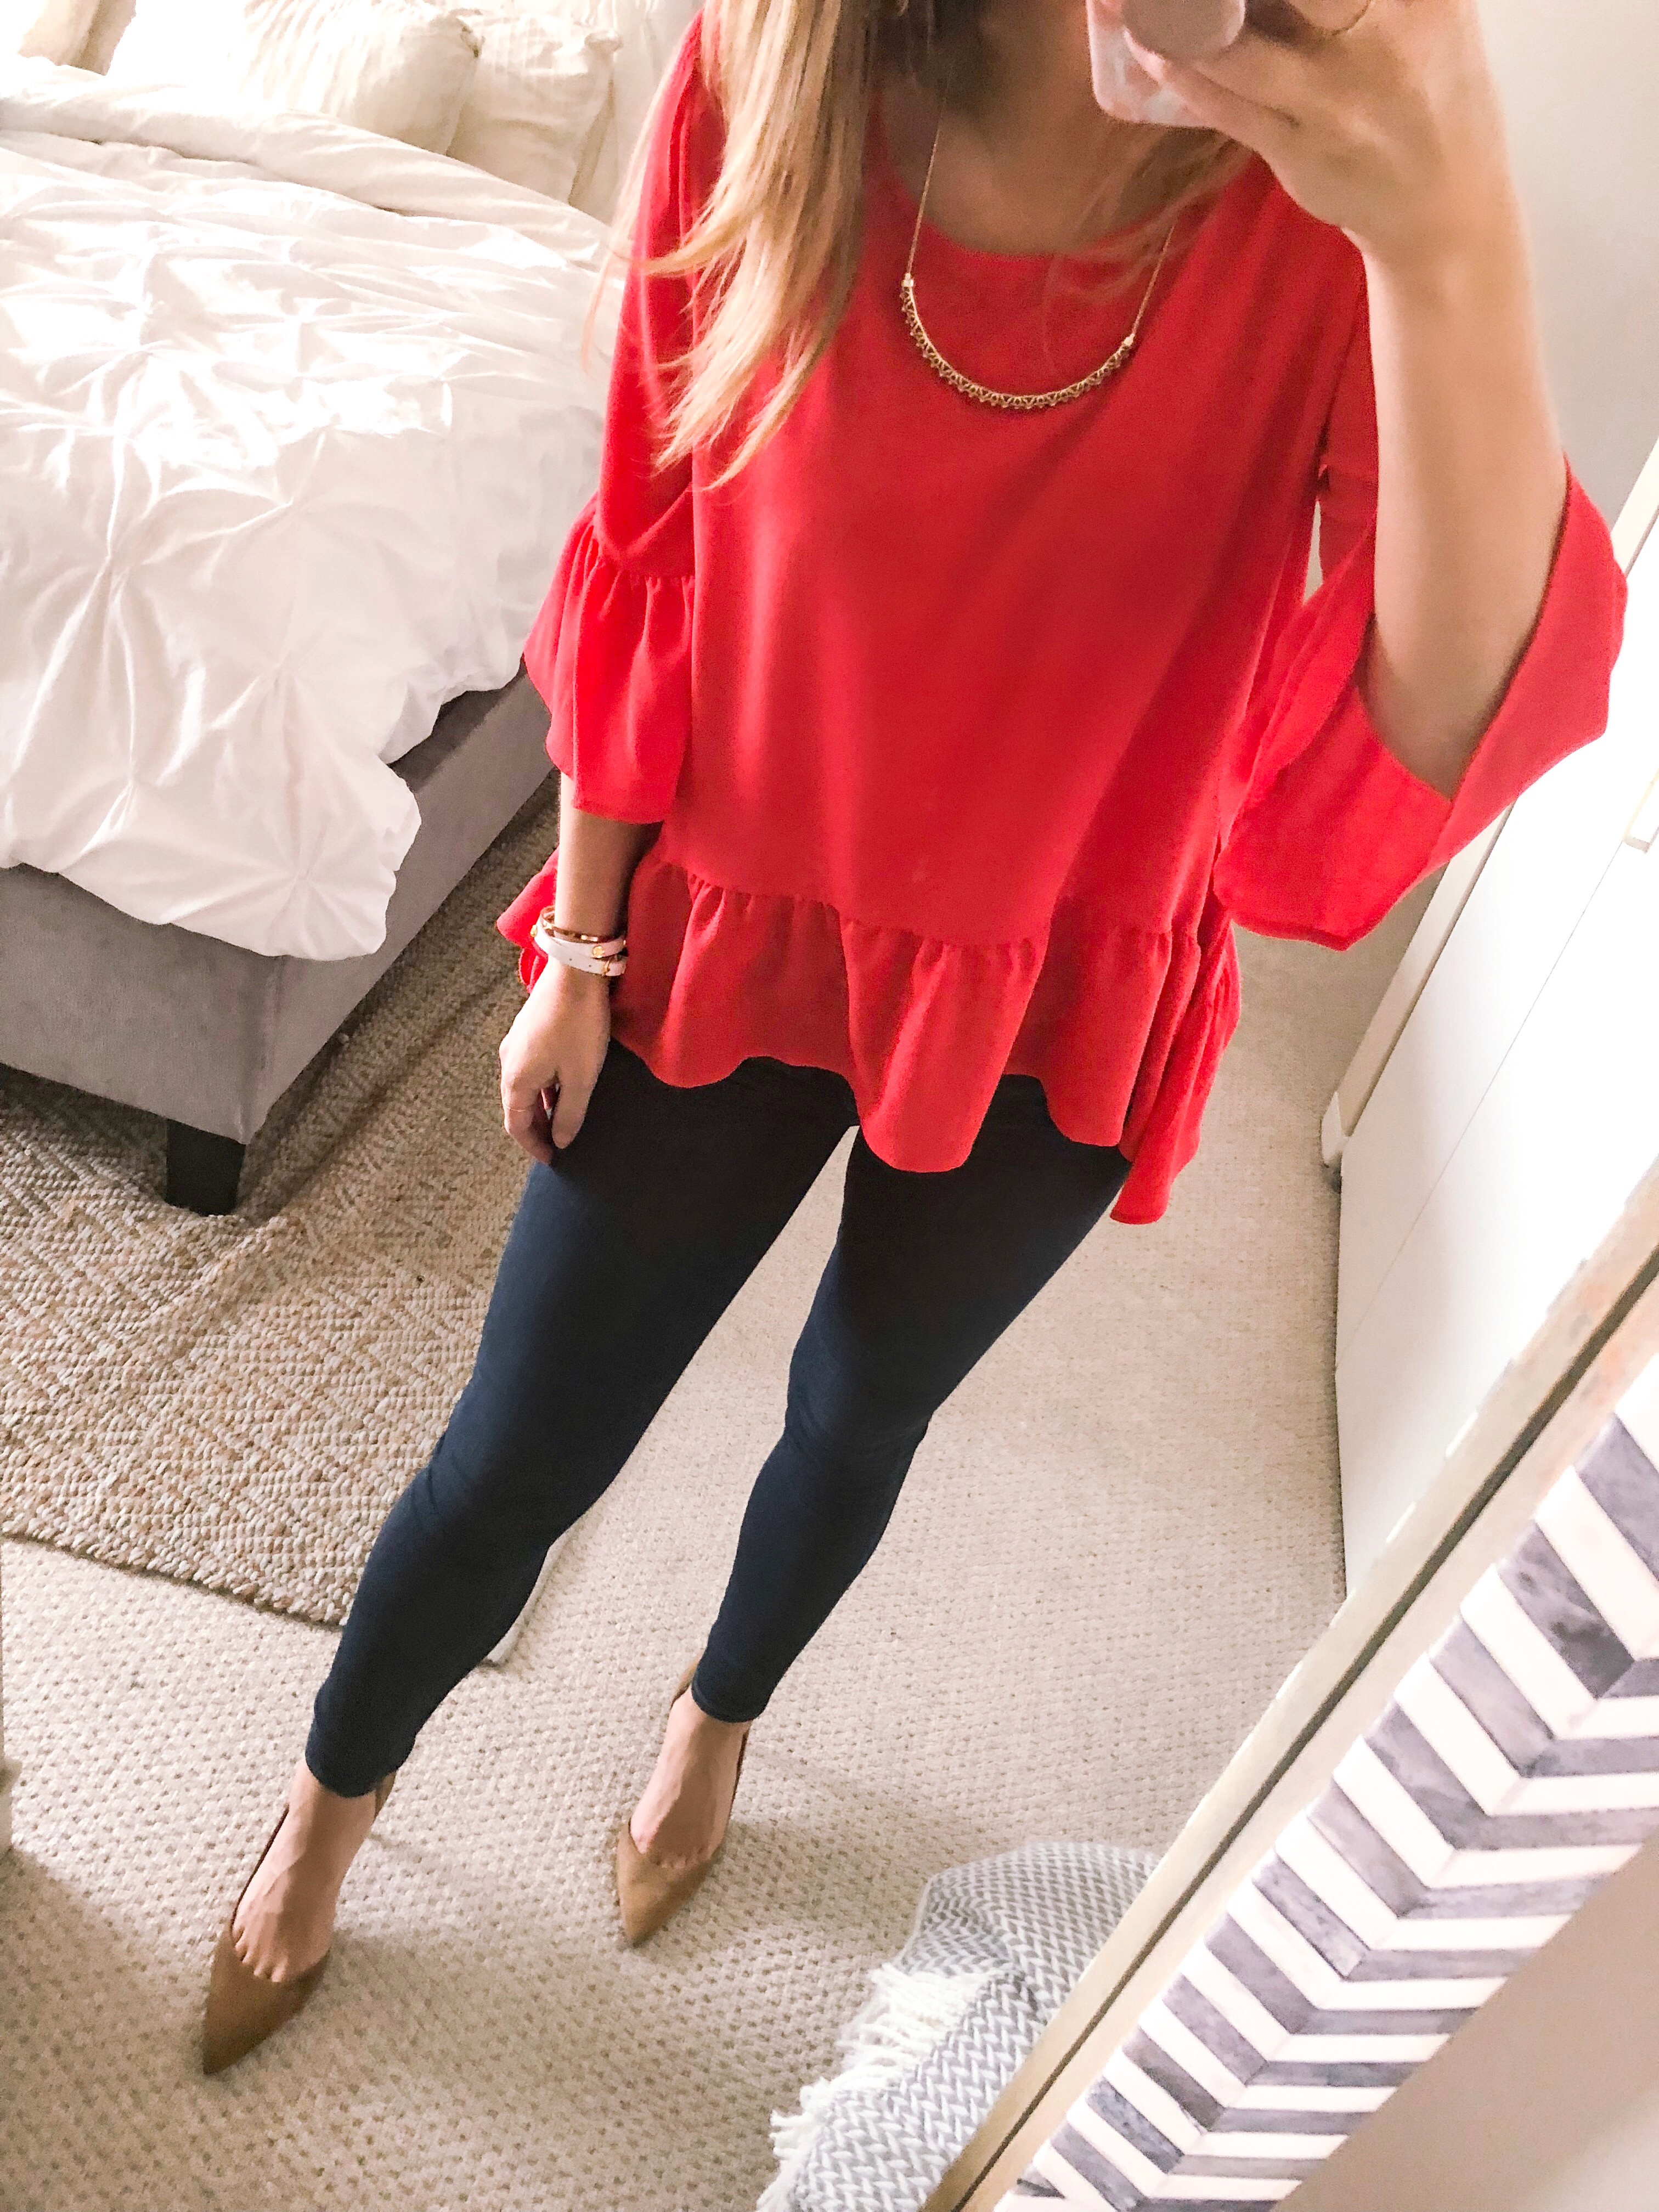 OOTD 2.8.17: Red Ruffled Top and Skinny Jeans